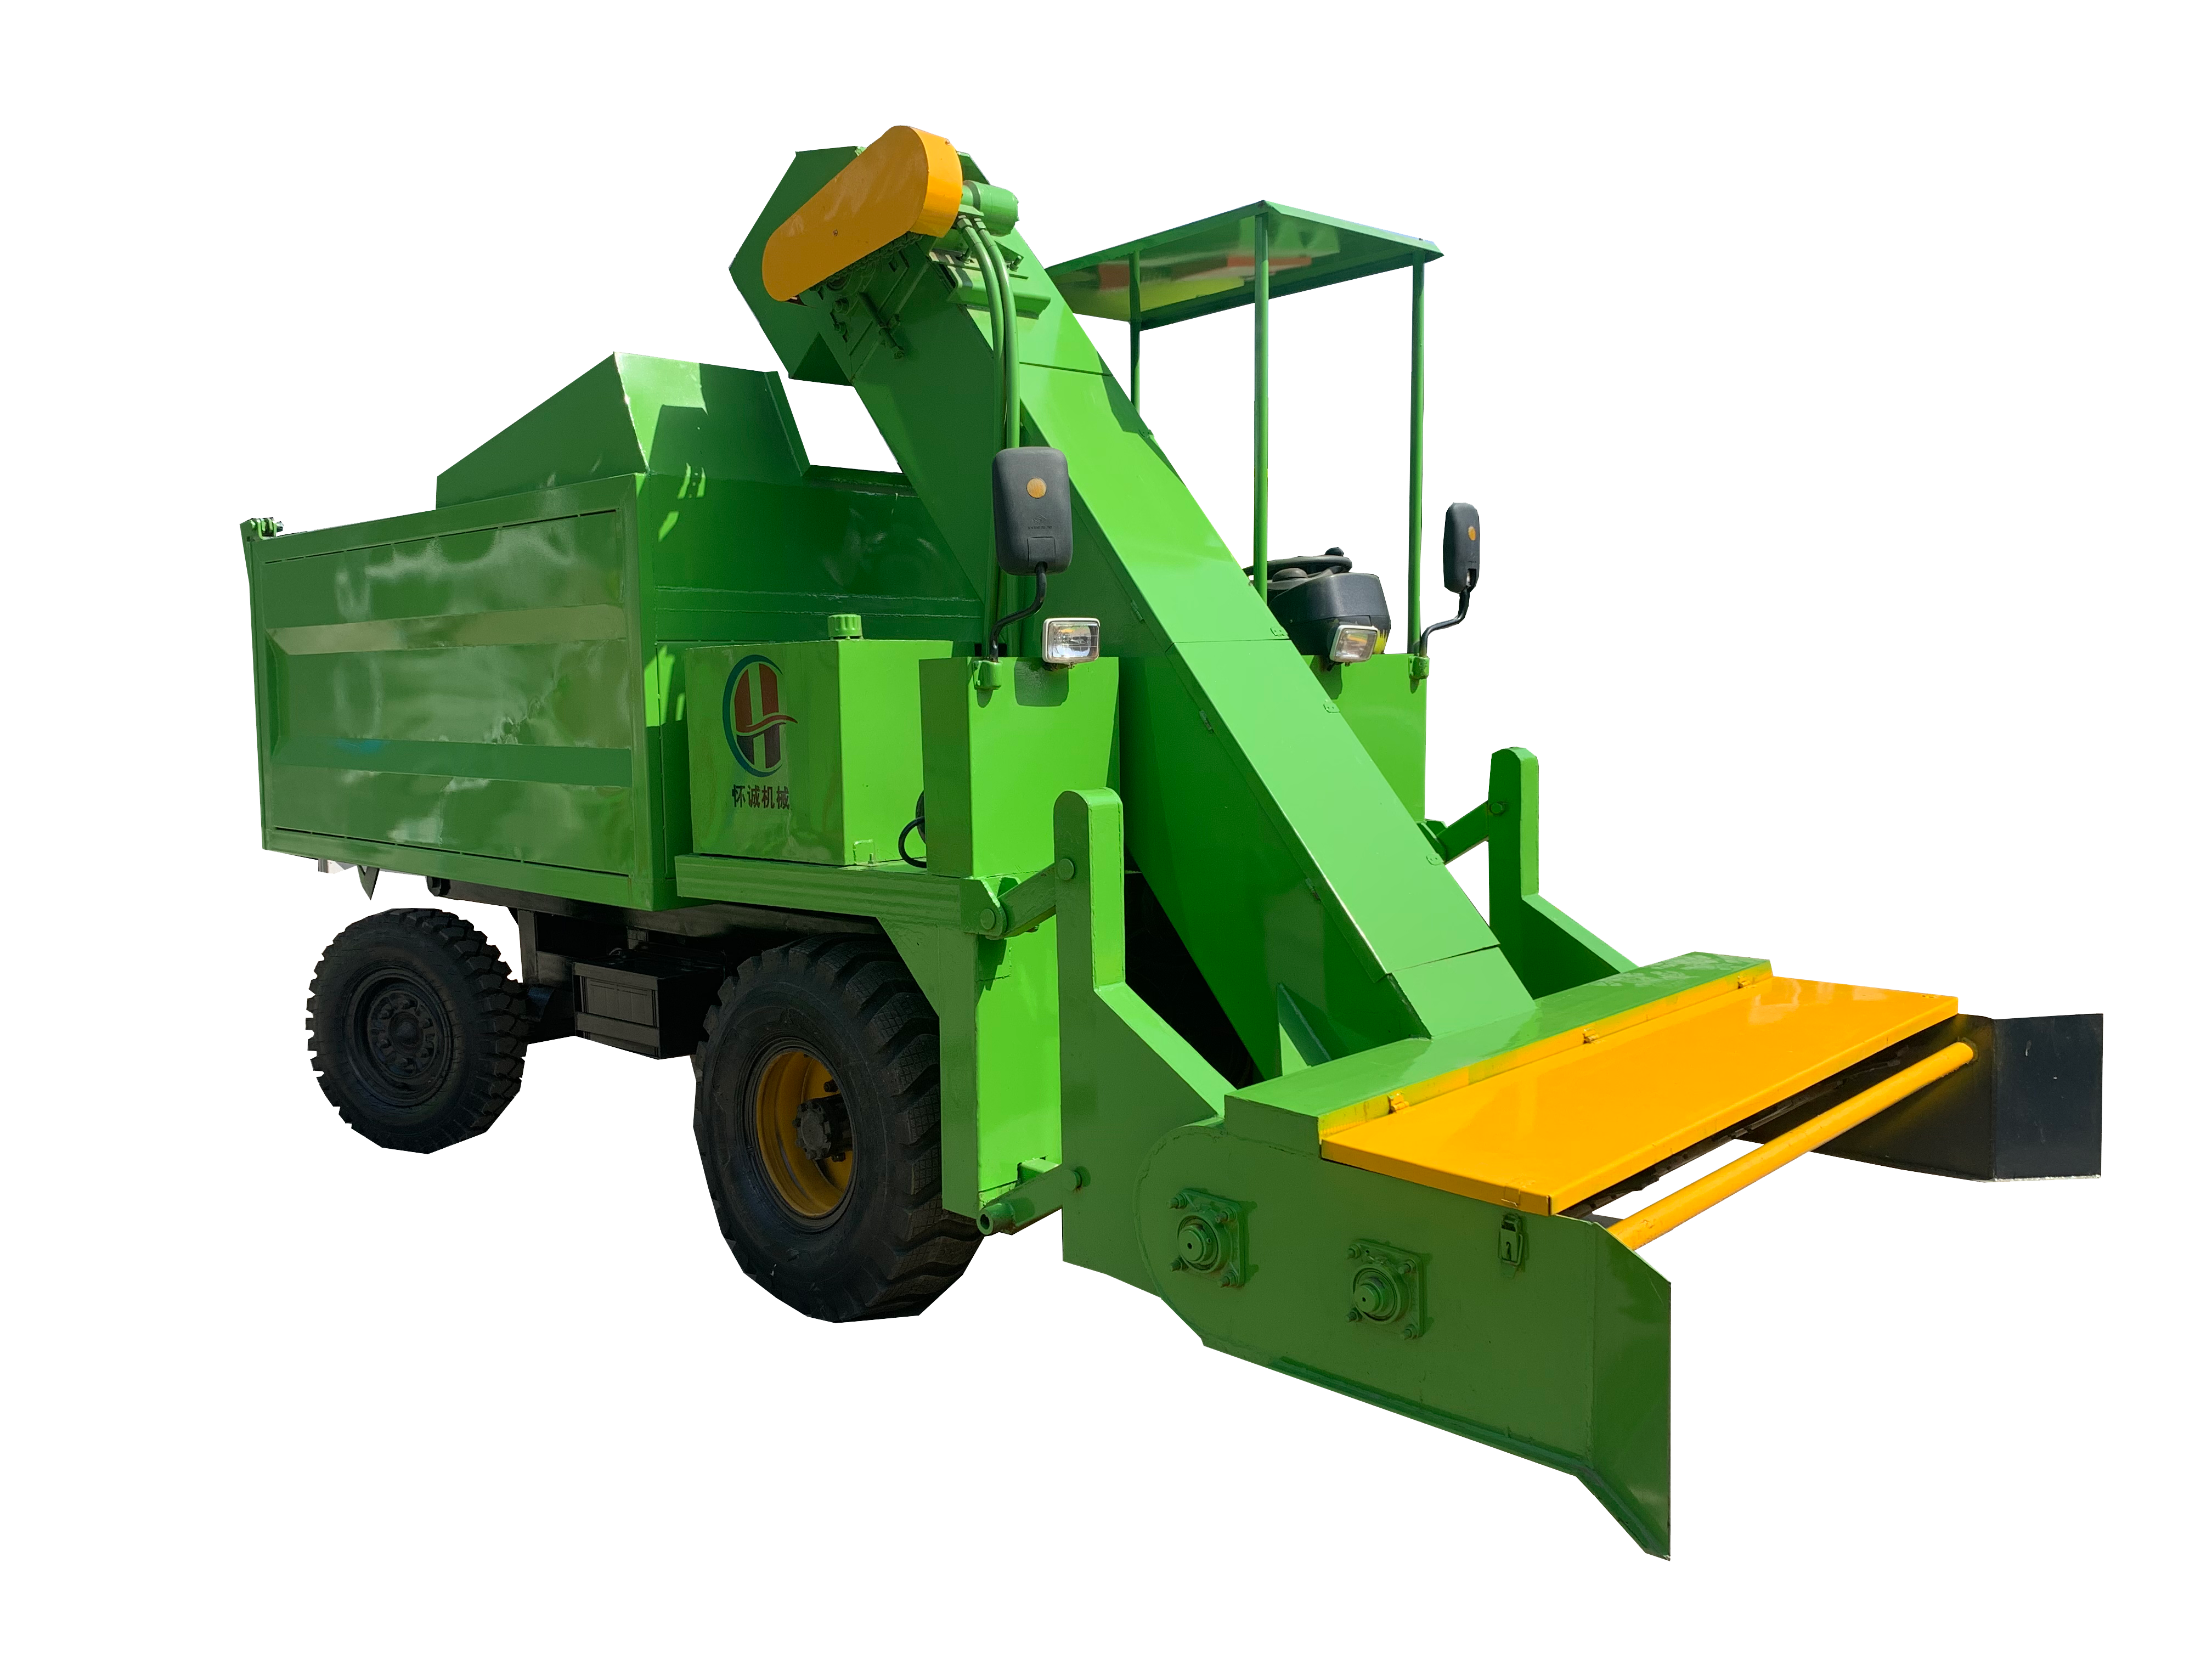 Efficient self-propelled manure cleaning truck suitable for sheep and cattle farms